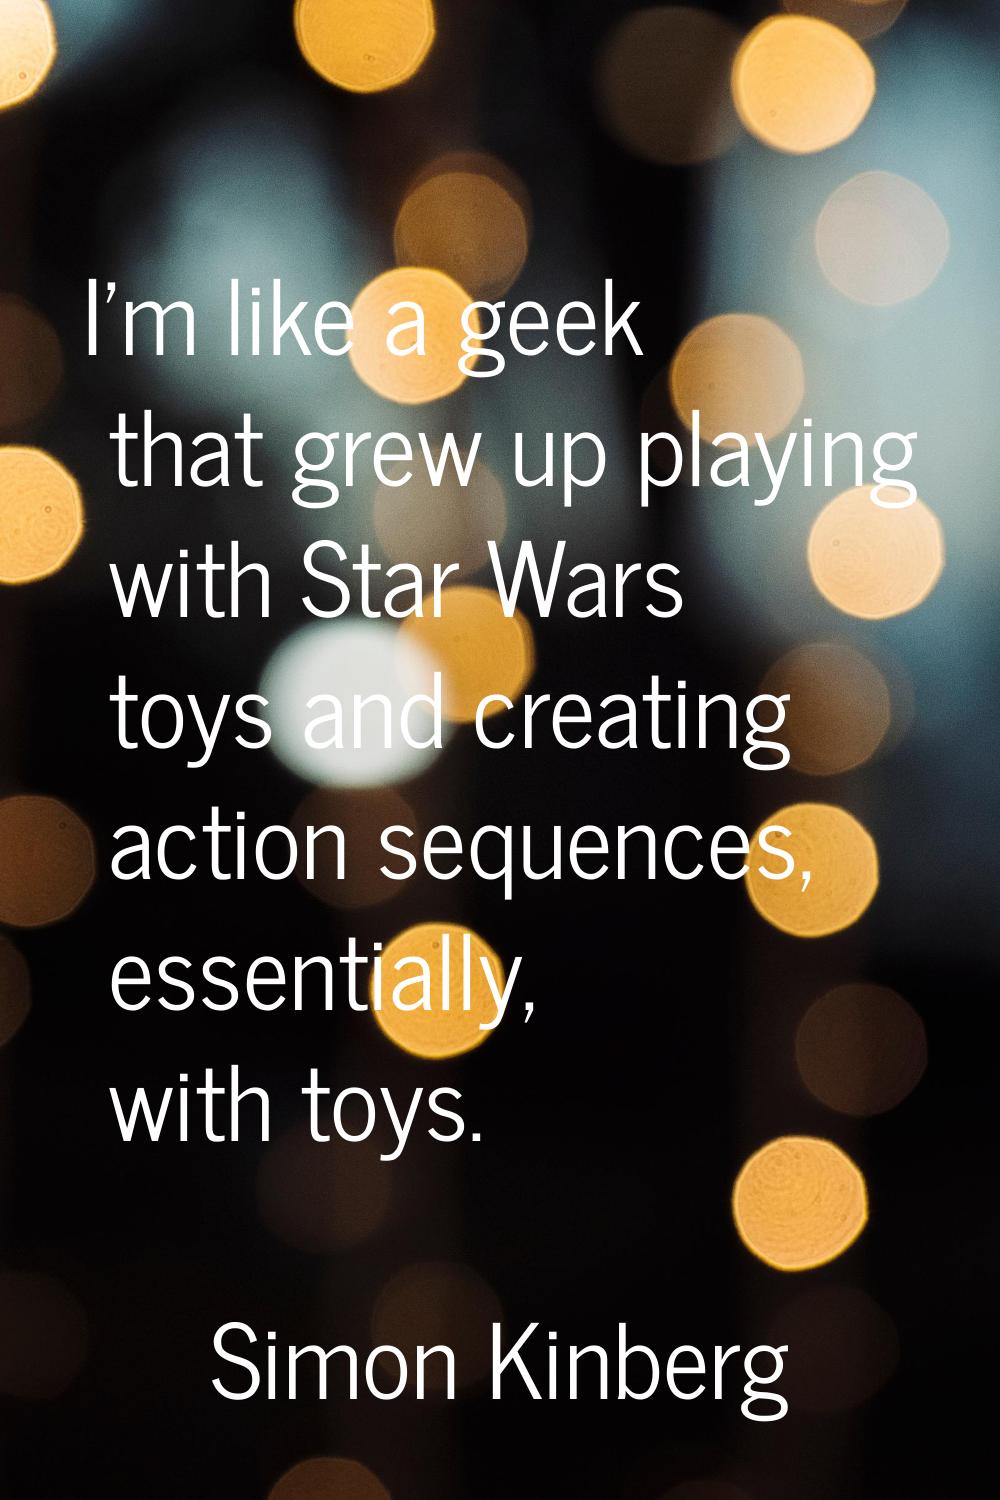 I'm like a geek that grew up playing with Star Wars toys and creating action sequences, essentially